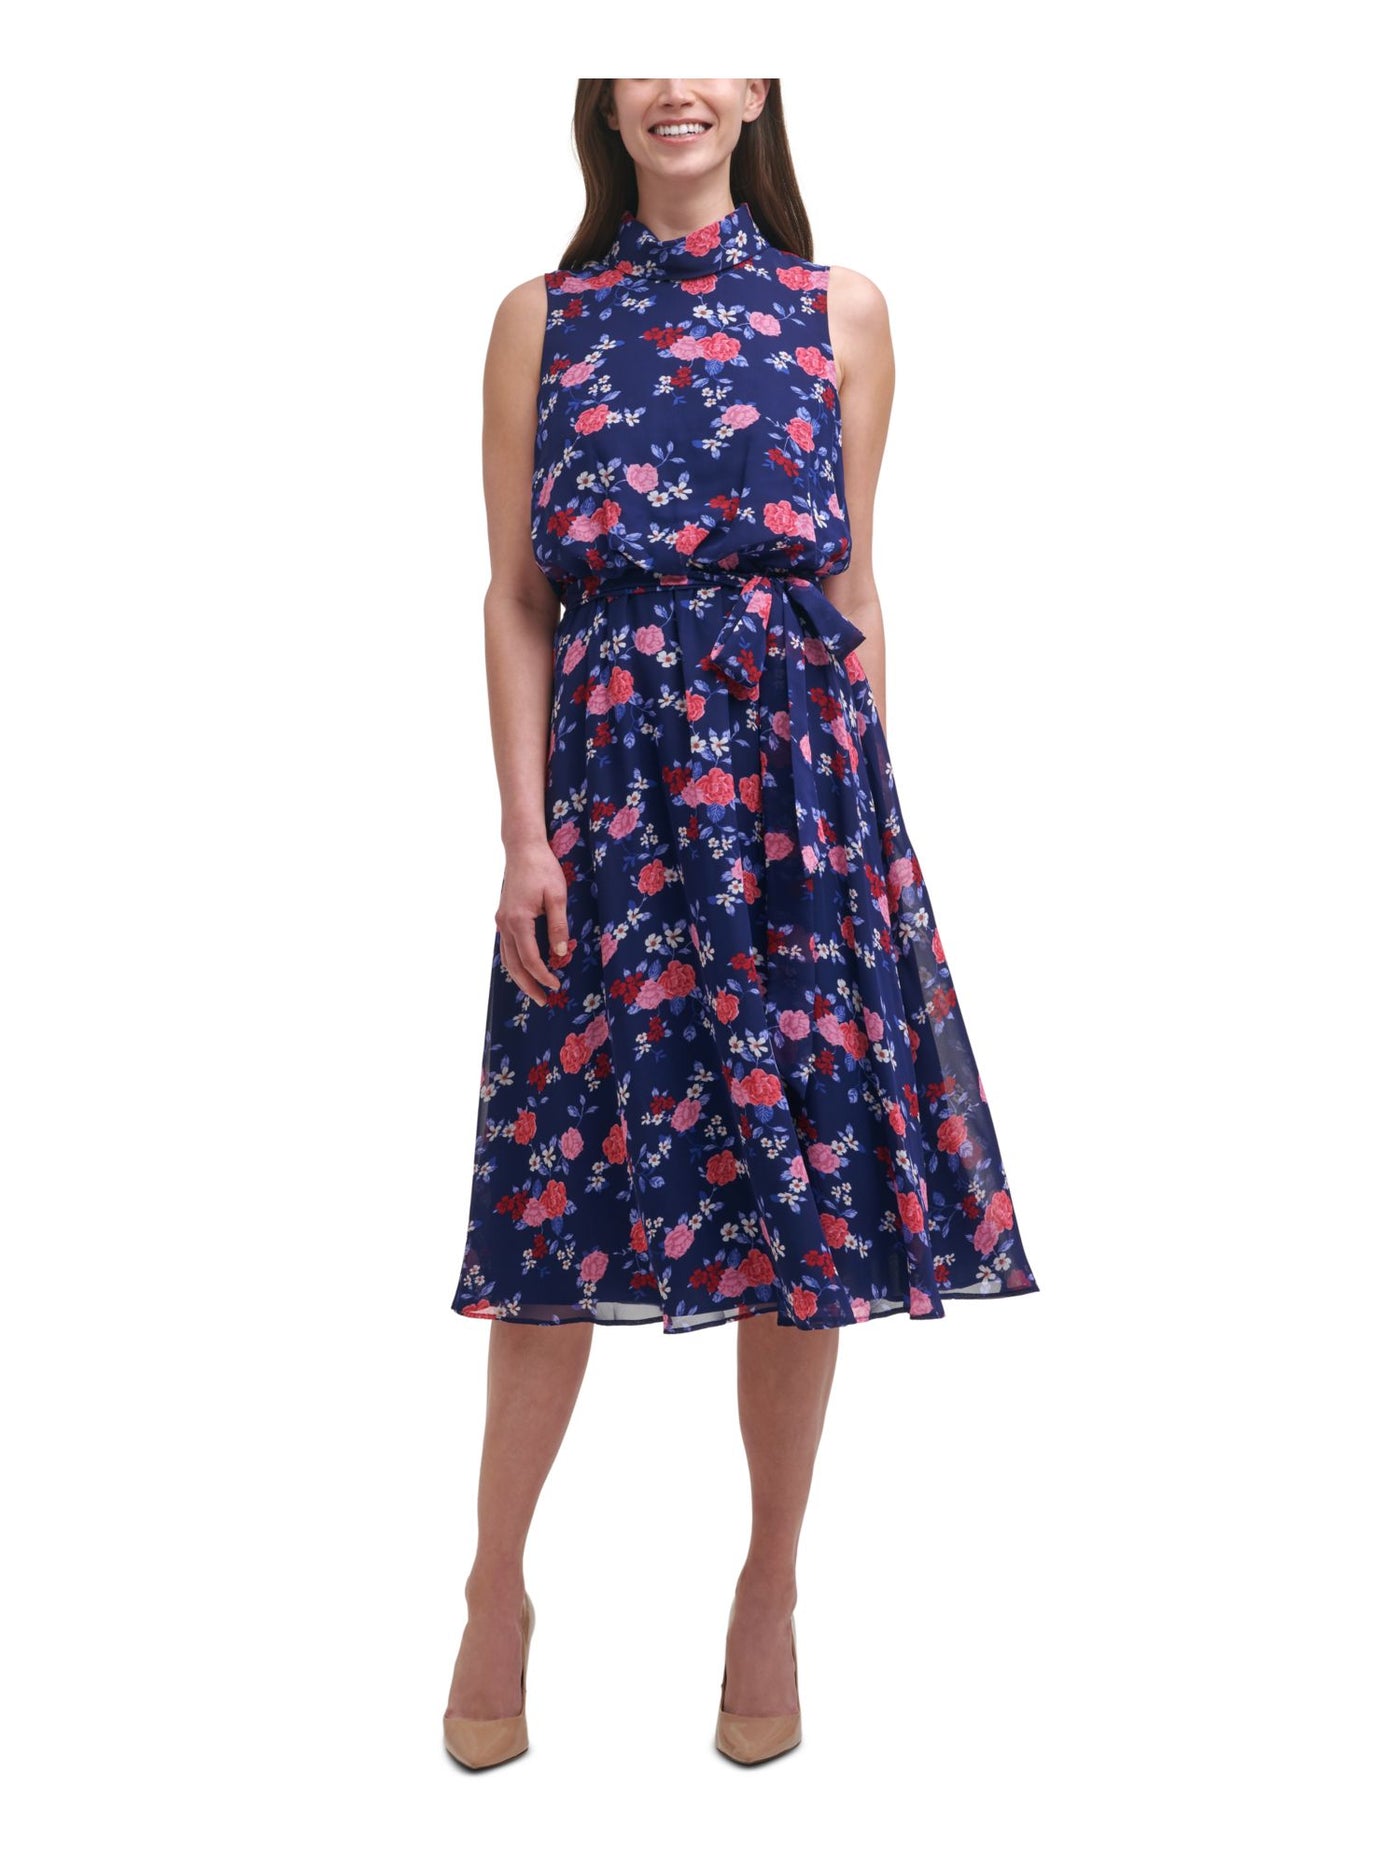 HARPER ROSE Womens Navy Zippered Belted Mock Roll-neck Chiffon Floral Sleeveless Midi Wear To Work Fit + Flare Dress 2